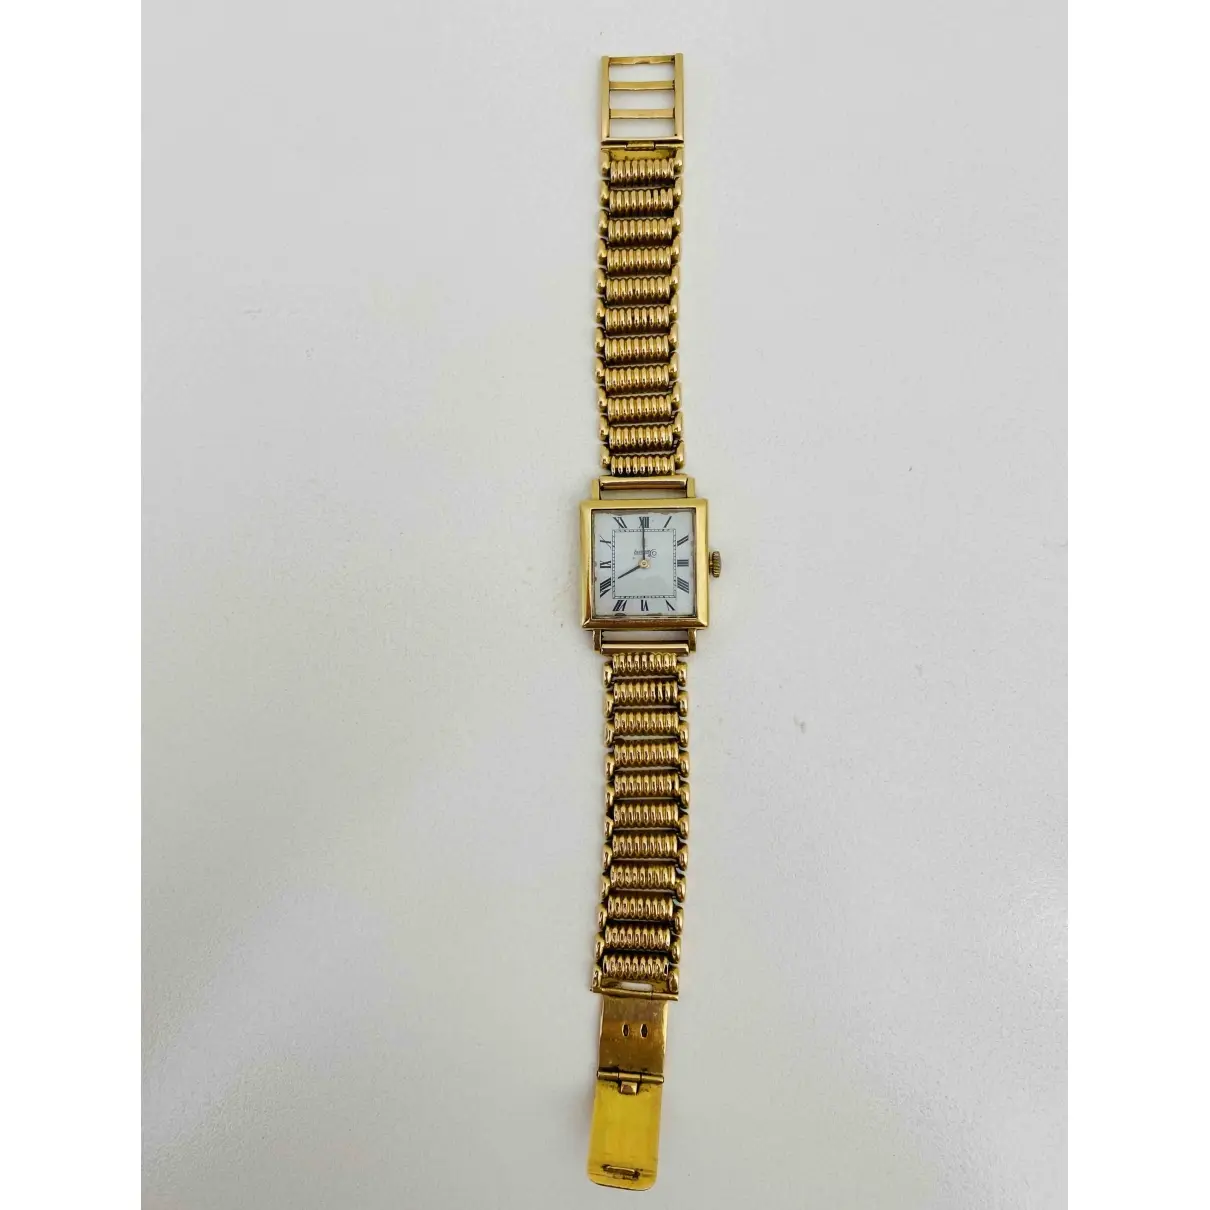 Eberhard Yellow gold watch for sale - Vintage